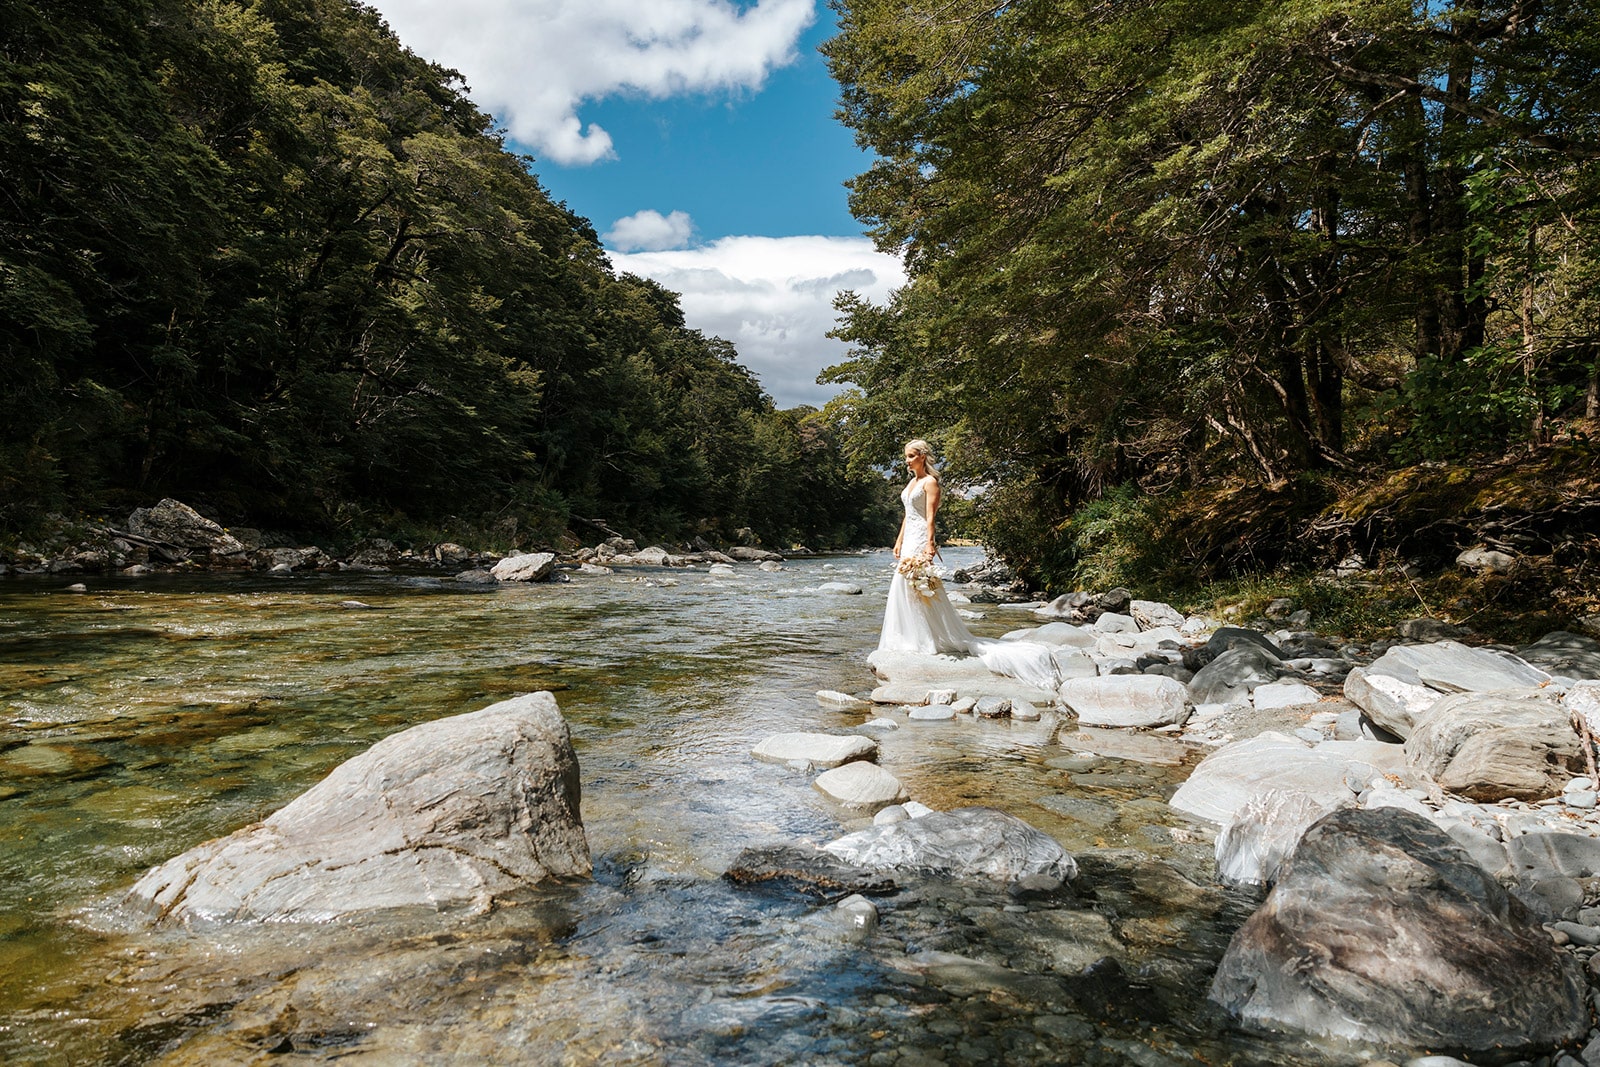 Heli Wedding in a beautiful forrest next to a river in Queenstown, secret wedding locations